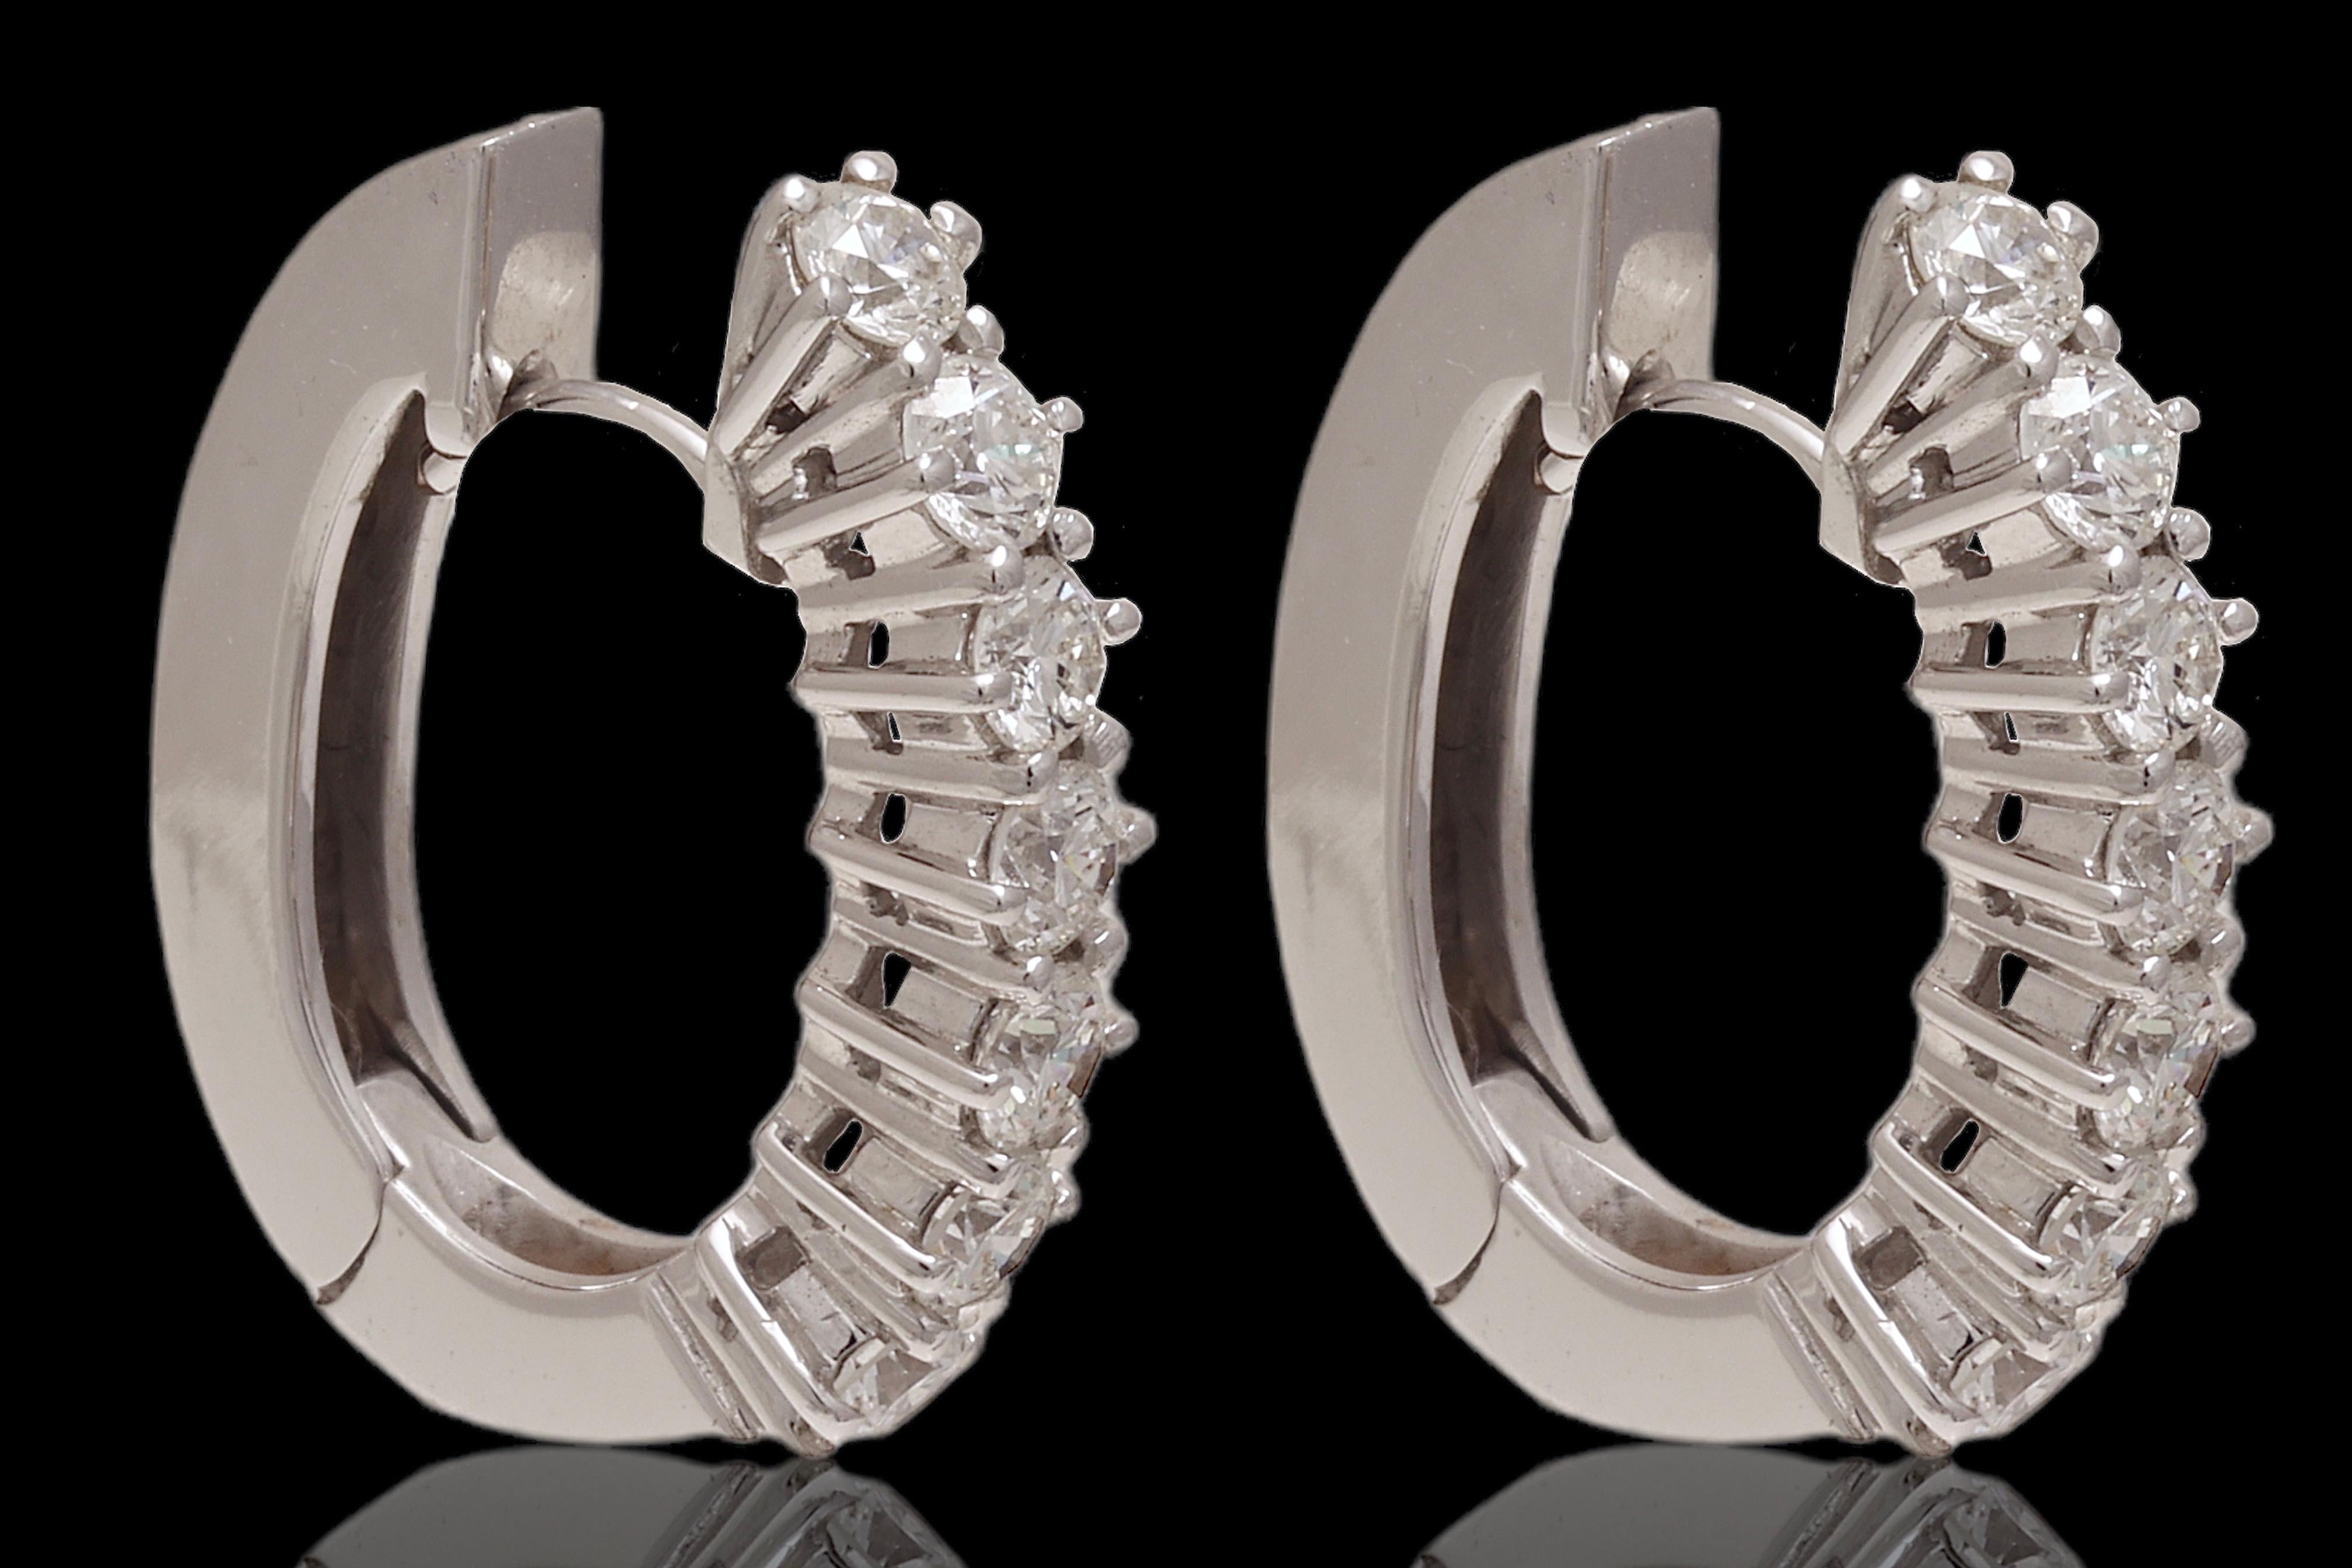 Gorgeous 18 kt. White Gold  Loop Earrings With 1.4ct Brilliant Cut Diamonds

Diamonds: Brilliant cut diamonds together 1.4 ct. GSI

Material : 18kt. white gold

Measurements: 21.5 mm x 17.2 mm x 4.1 mm

Total weight: 8.6 gram / 0.305 oz / 5.5 dwt